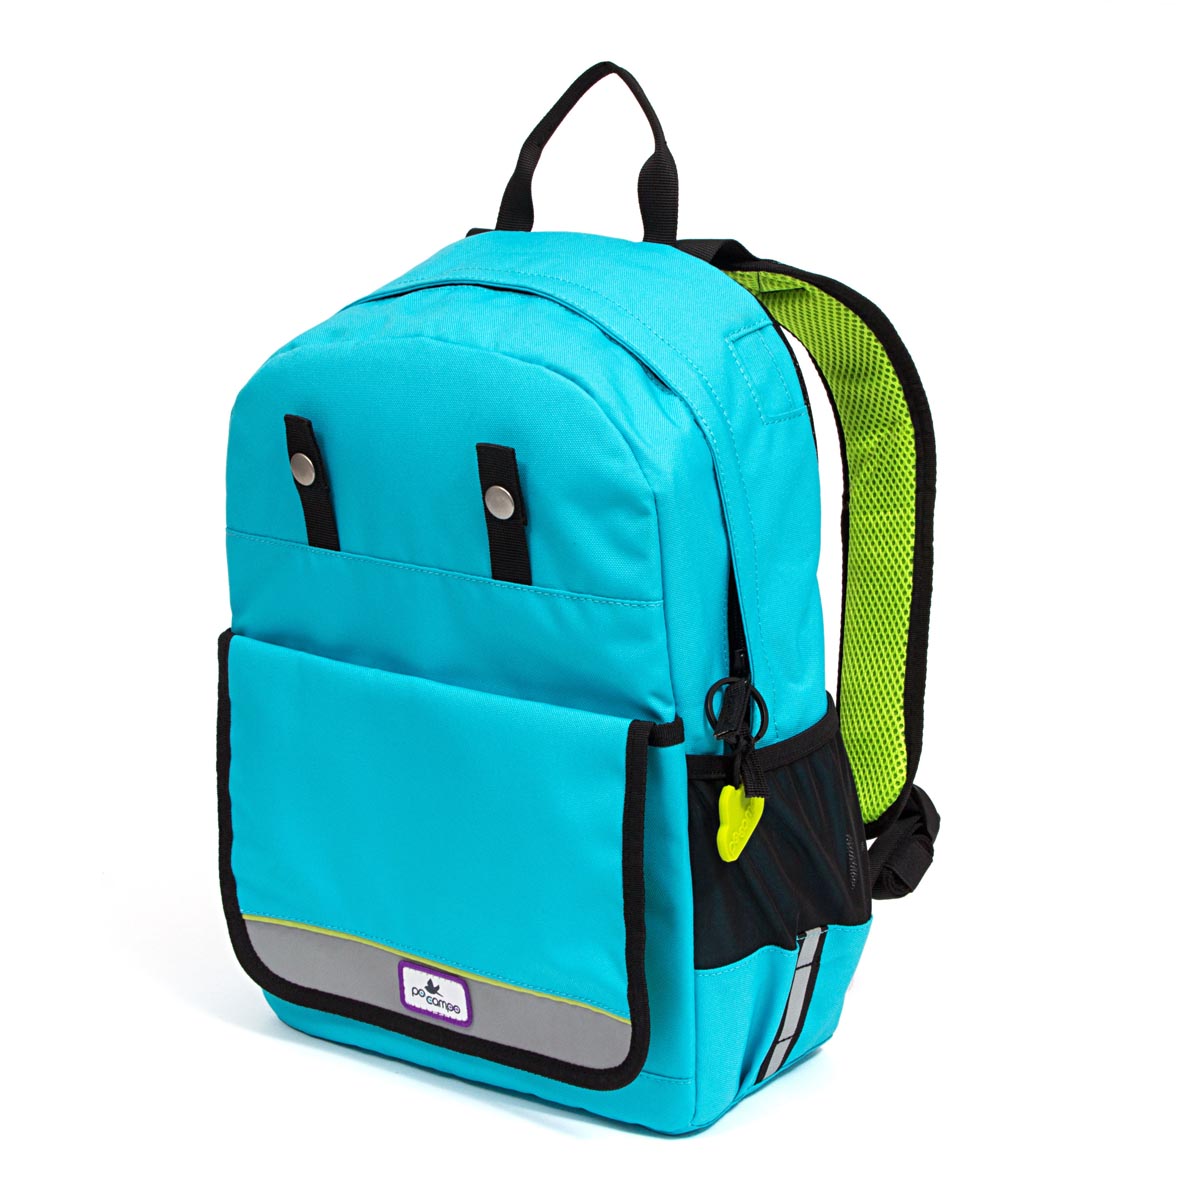 Po Campo kids backpack pannier